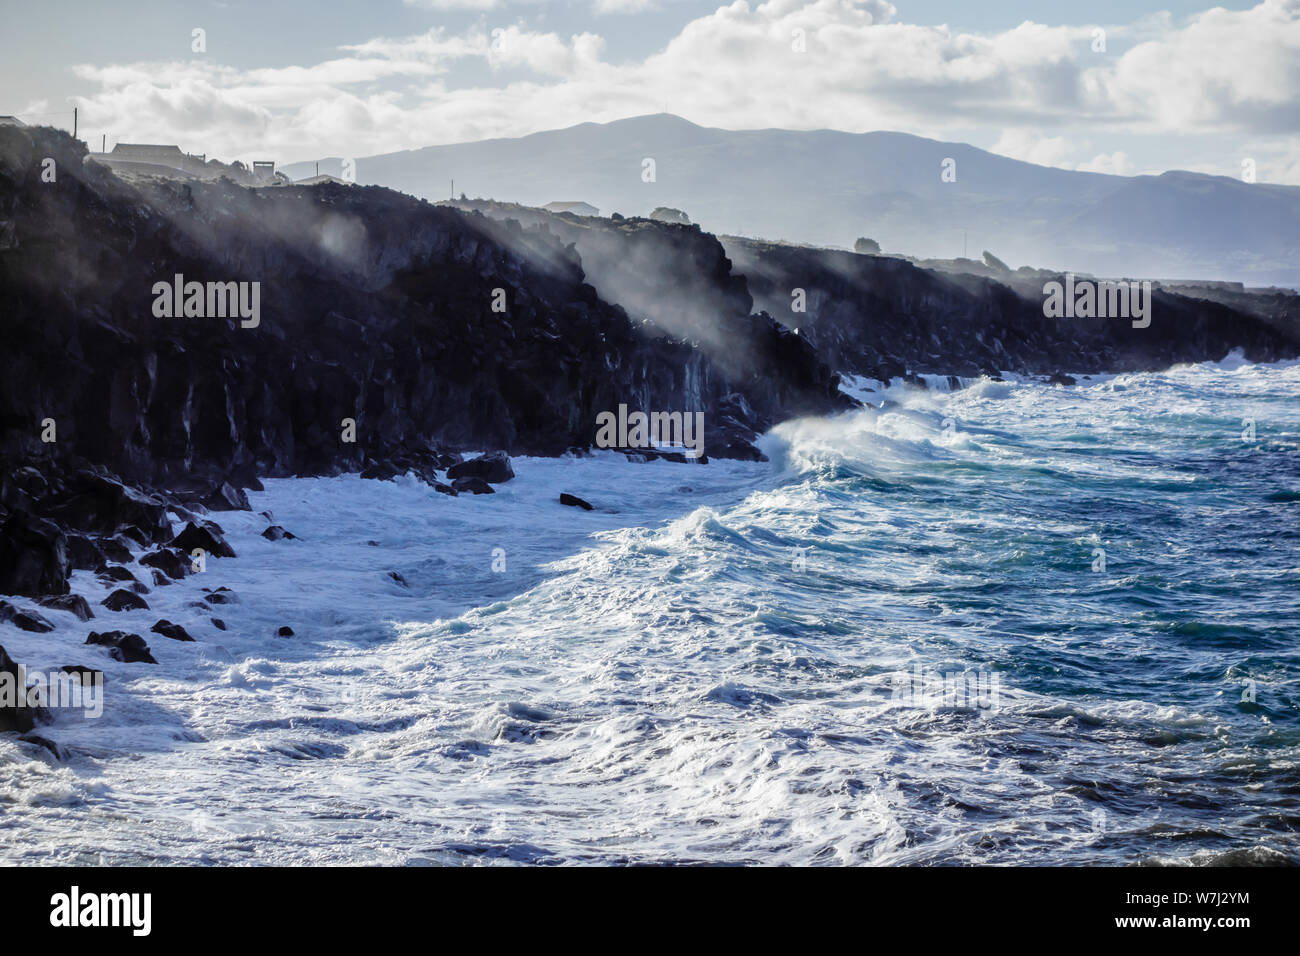 Ocean waves splashing on jagged cliffs with spray reflecting sunlight, in Azores, Portugal. Stock Photo